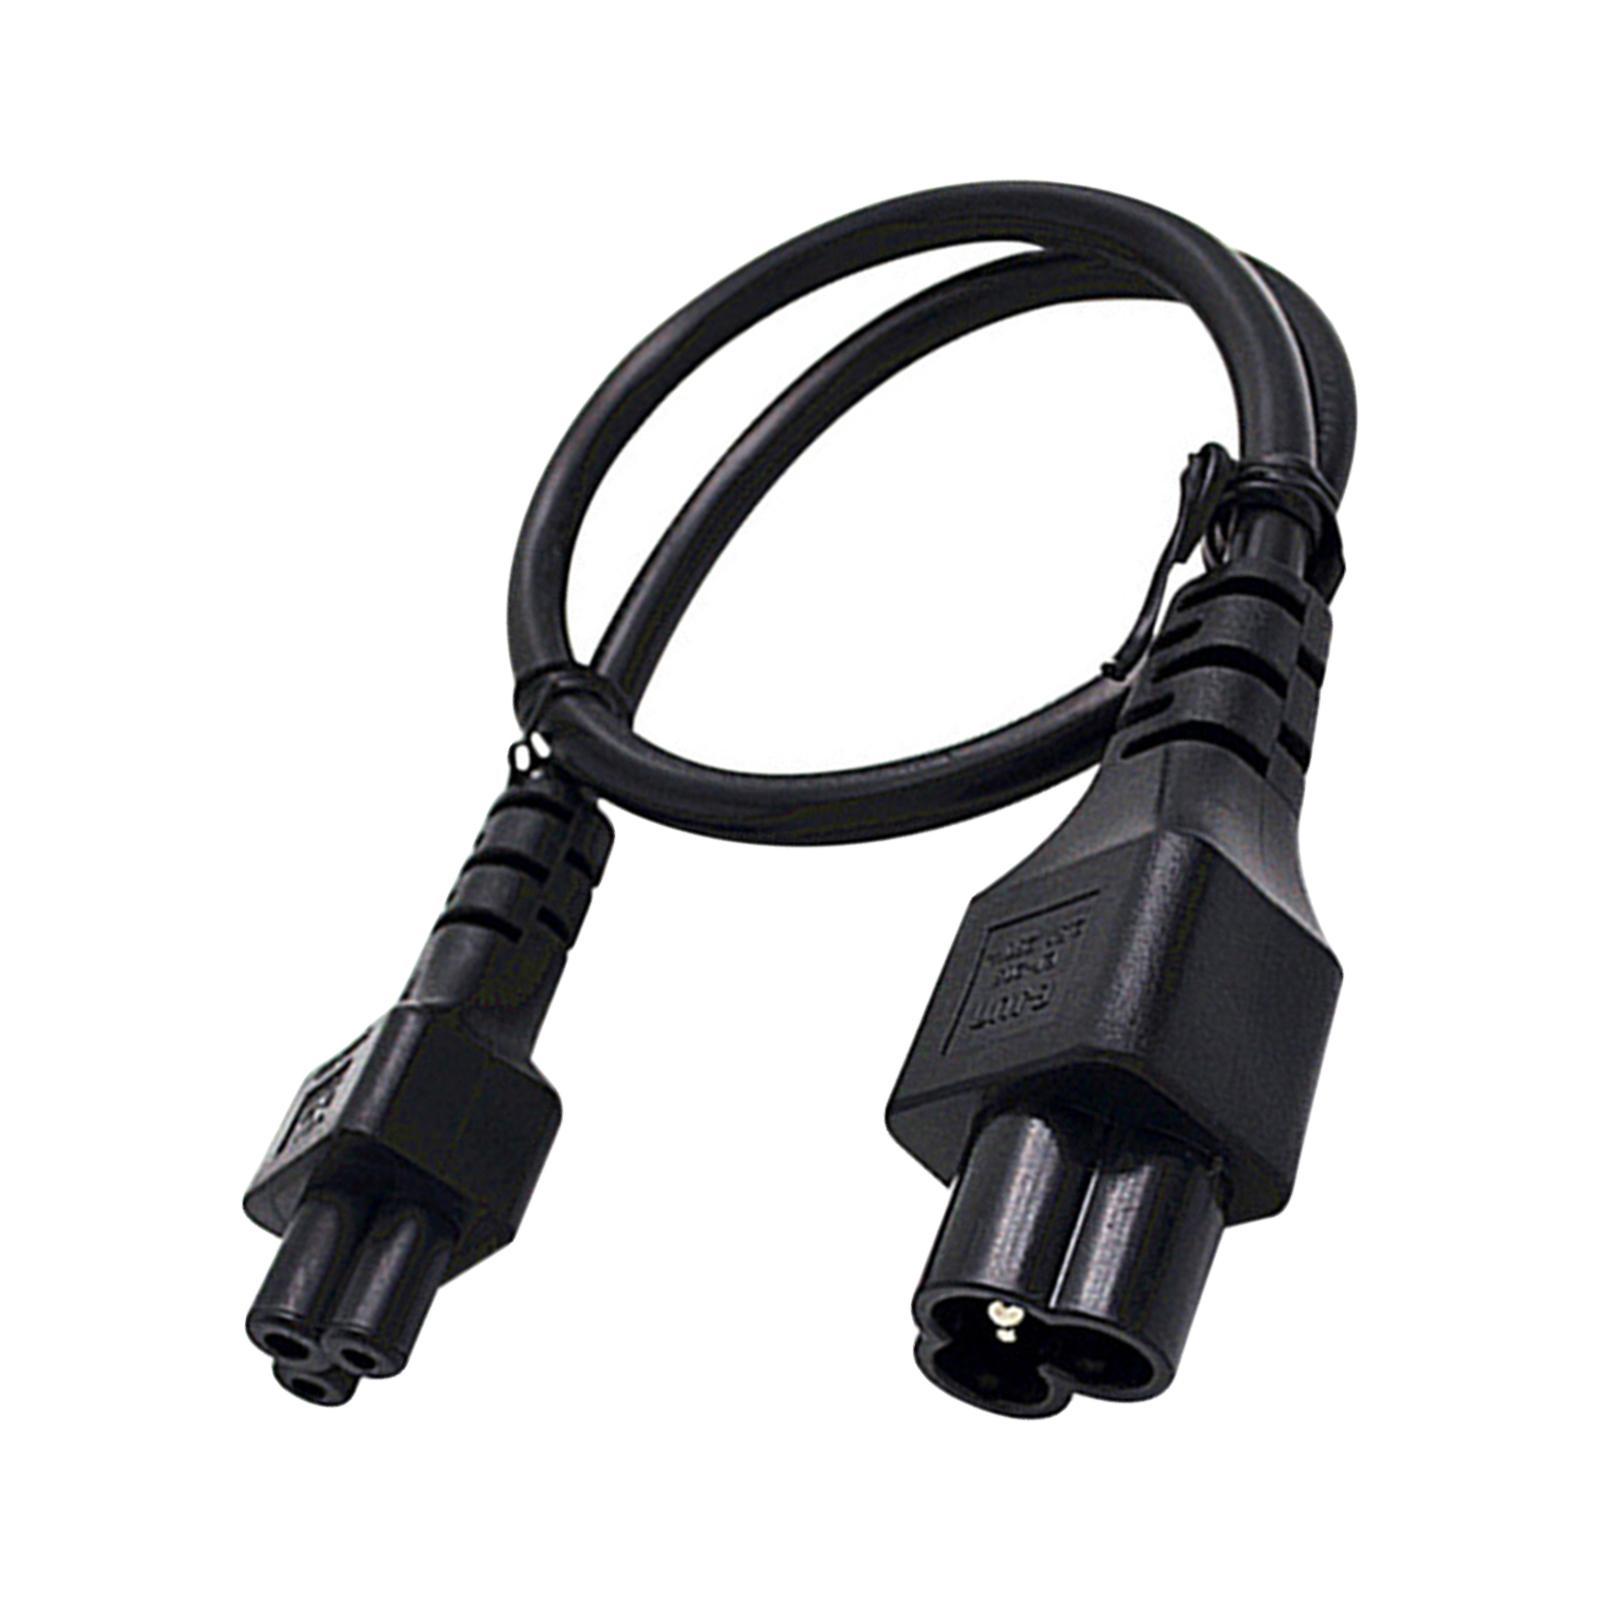 3Pin IEC320 C5 Female to C6 Male Extension Cable Stable Transmission Male to Female Low Resistance 2ft/0.6M 2.5A for Scanner Computer Laptop